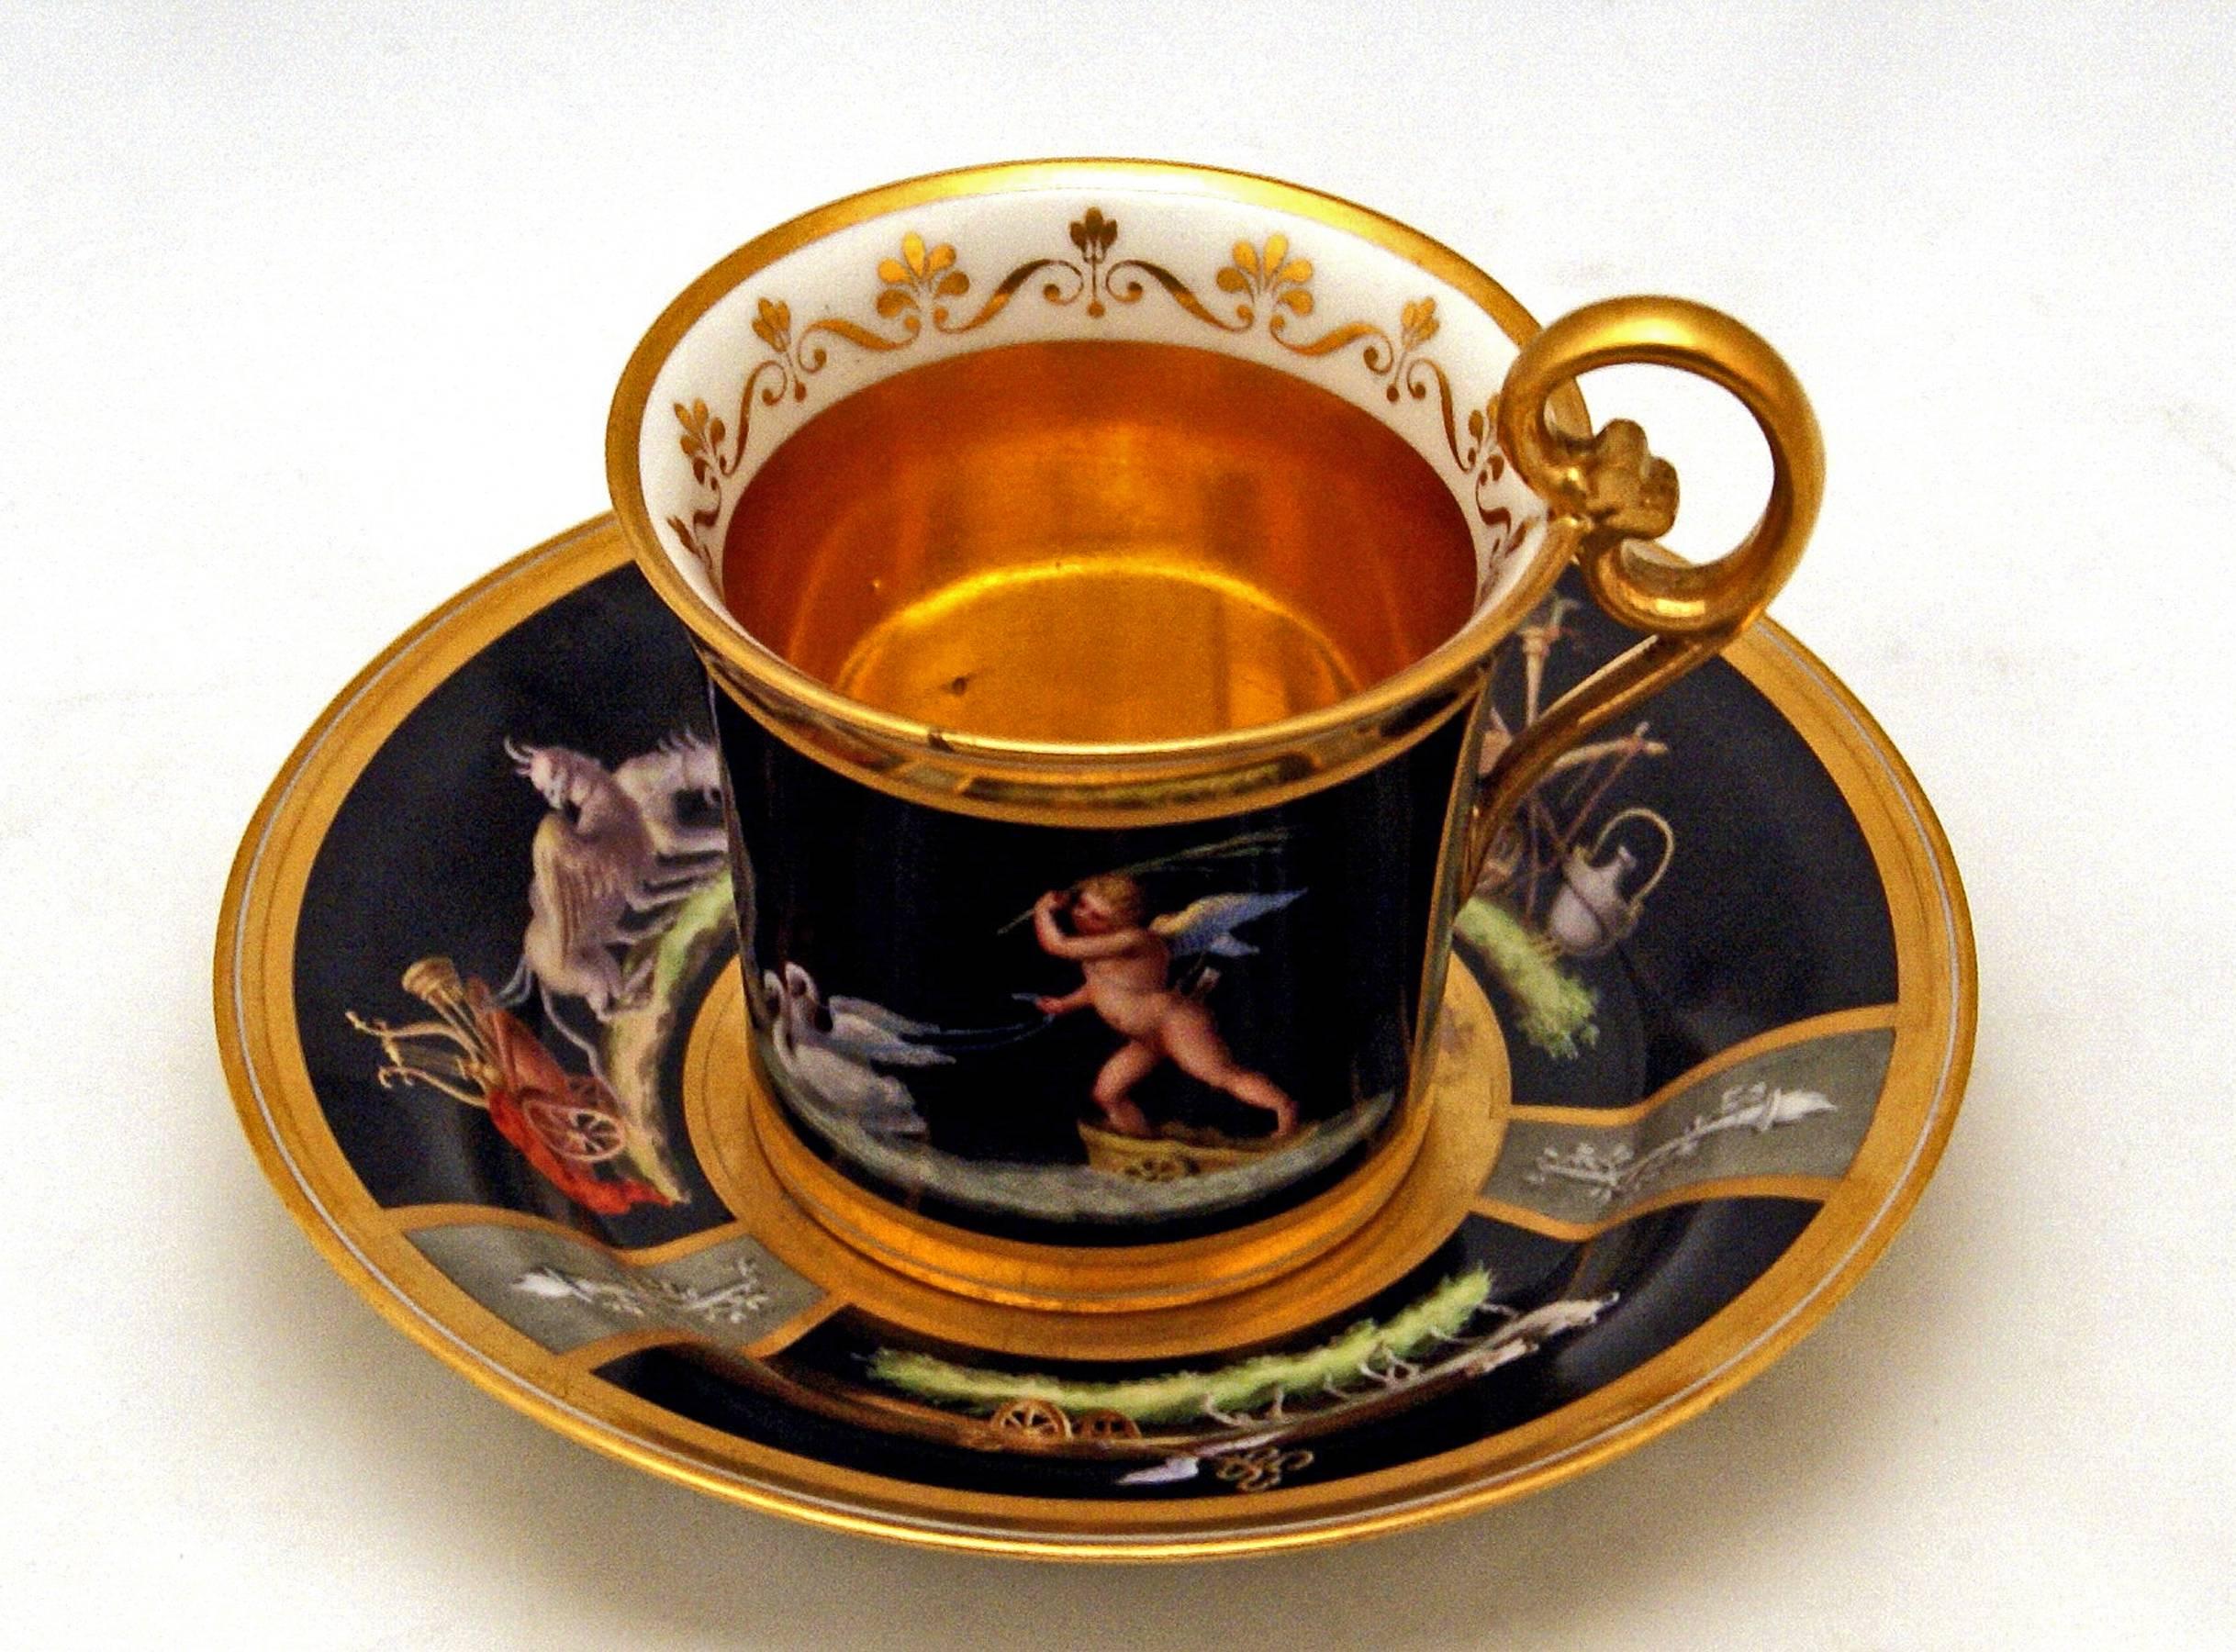 Vienna Imperial Porcelain Cup Saucer Cherubs Driving Chariots Dated 1814 Austria 3